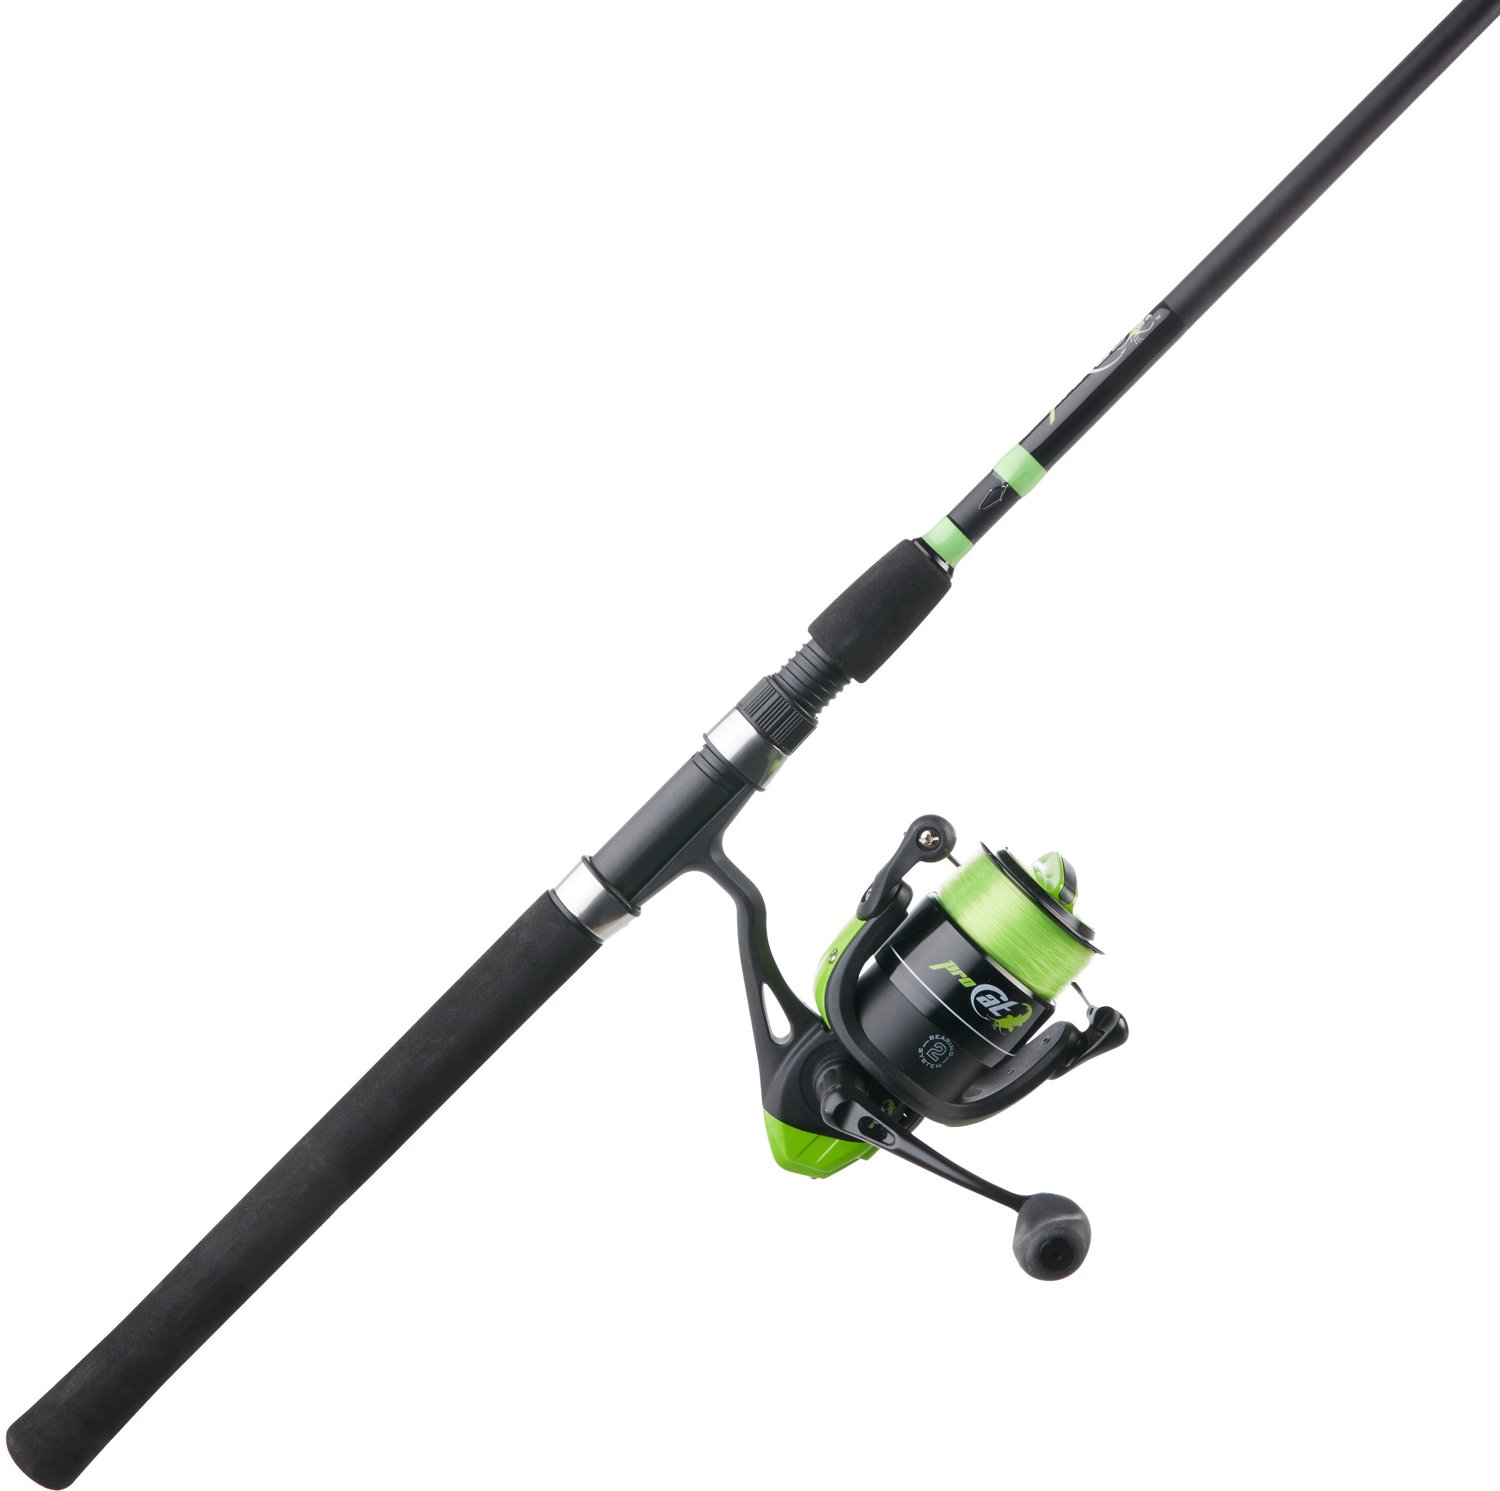 H2O XPRESS Pro Cat Spinning Rod and Reel Combo Kit